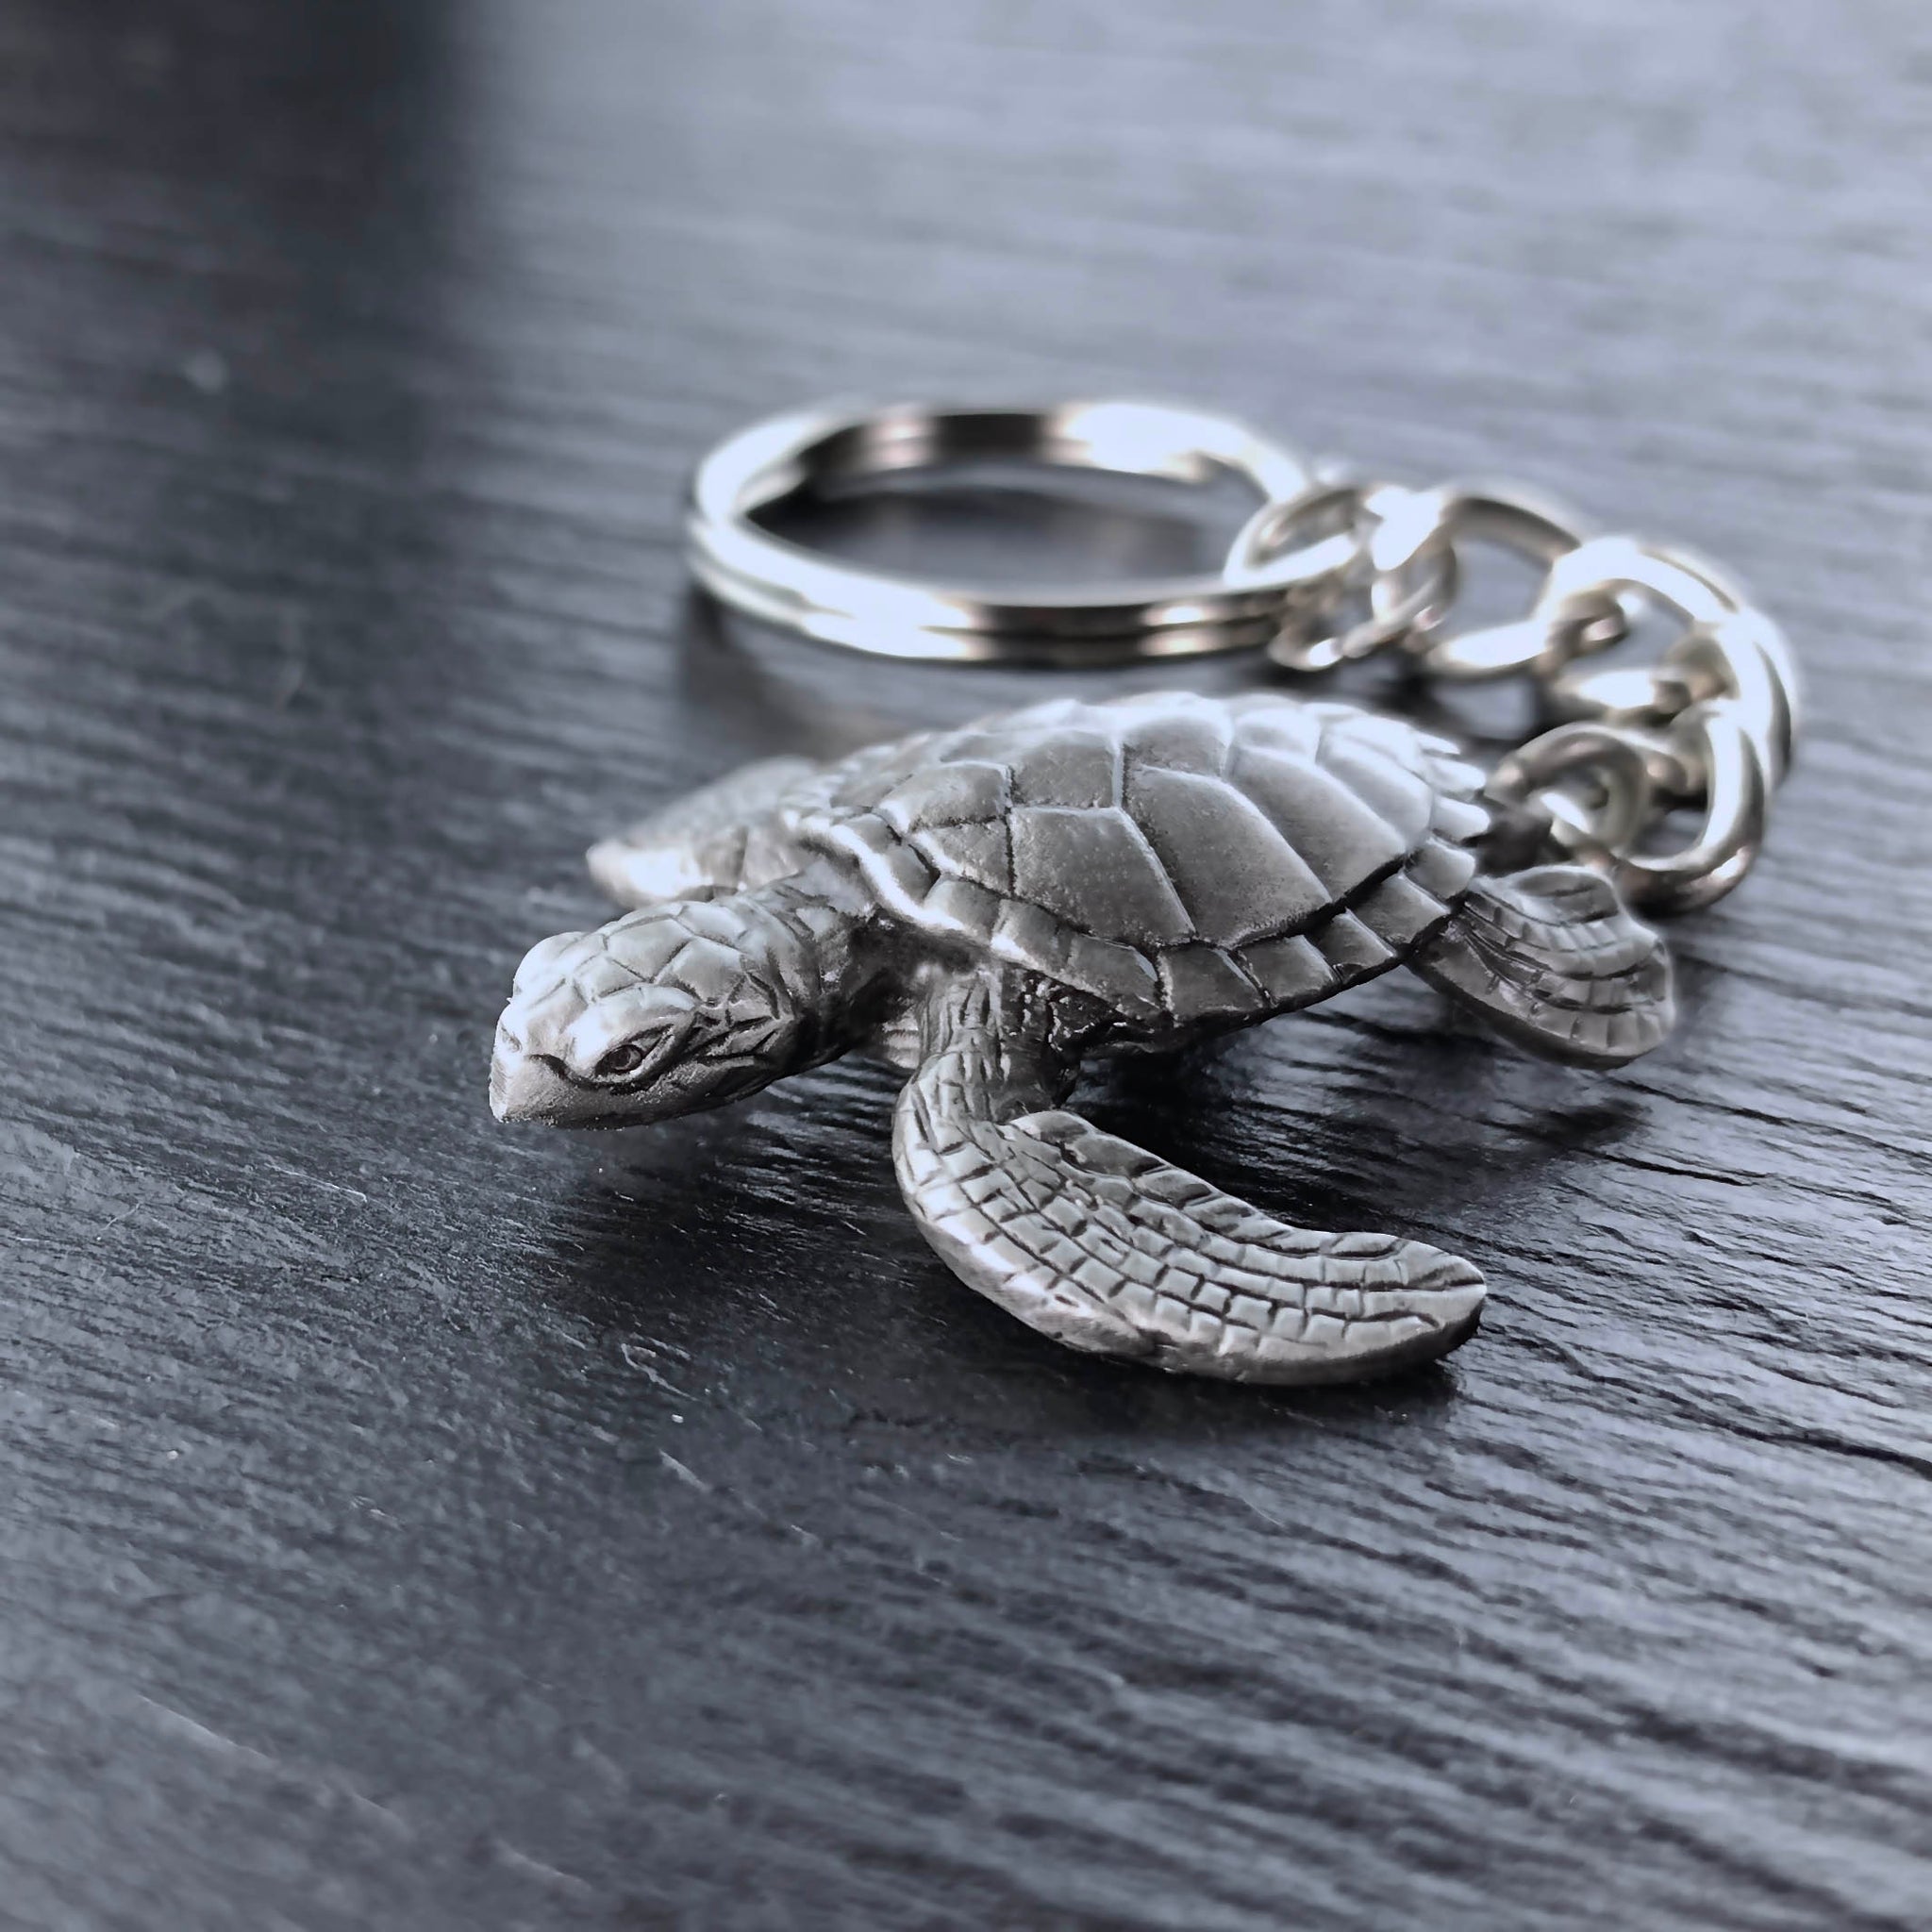 41 Wonderful Gifts For Turtle Lovers They Will Actually Want